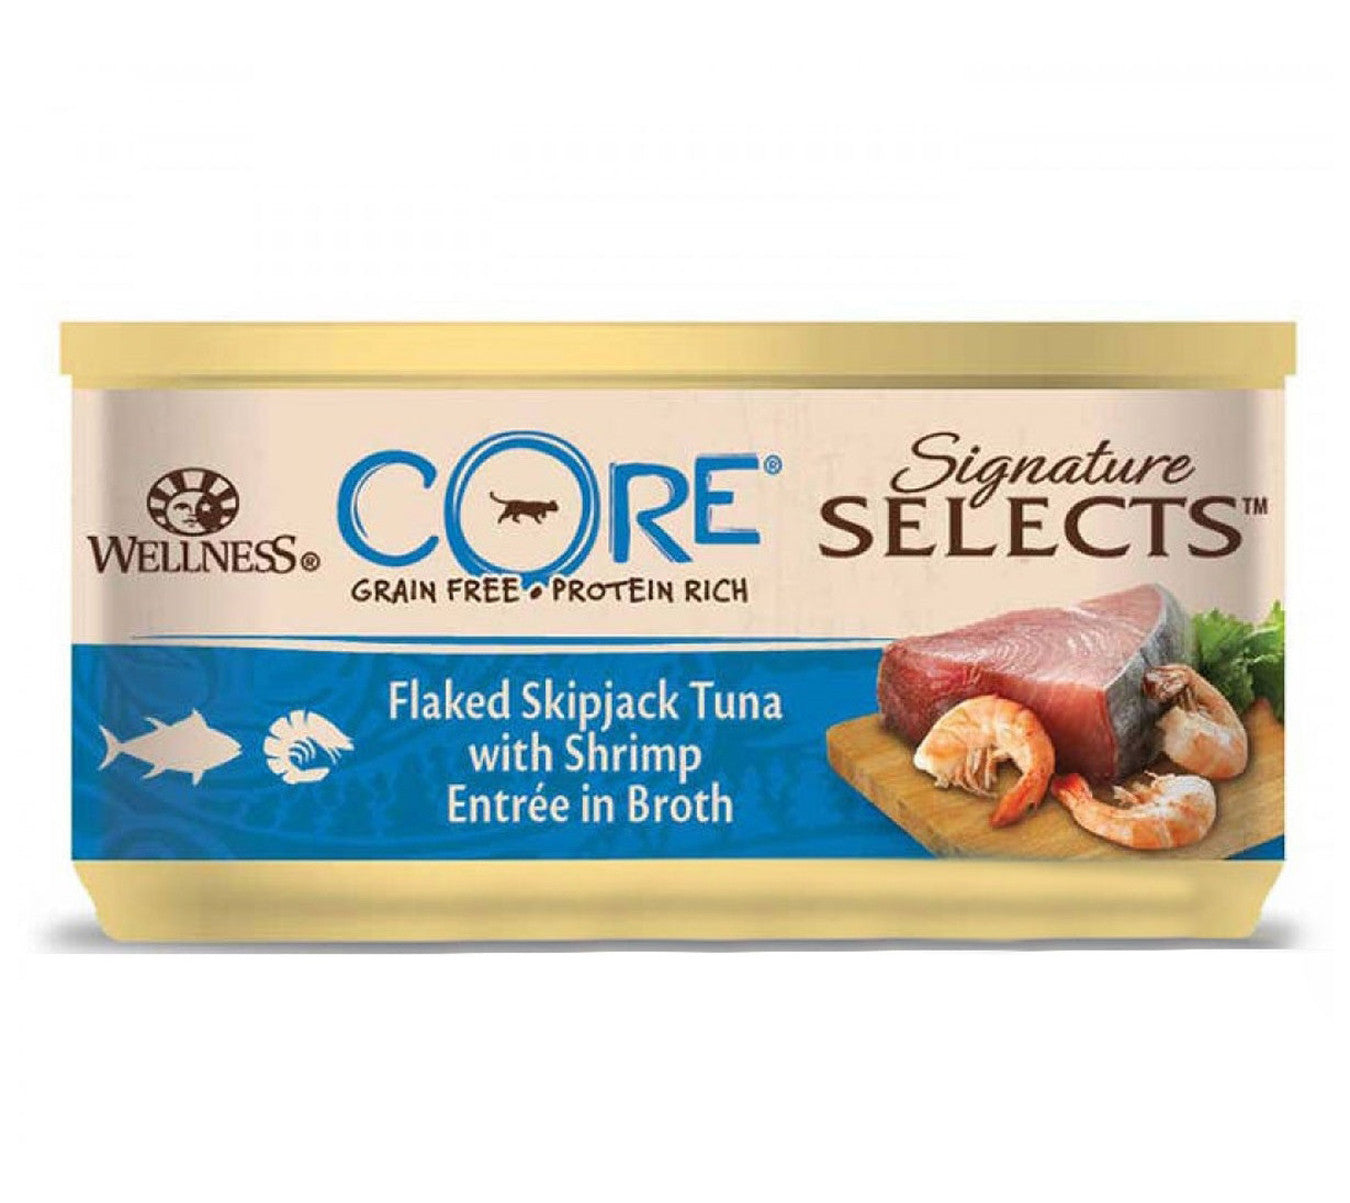 Wellness CORE Signature Selects Flaked Skipjack Tuna with Shrimp Entree in Broth for Cat, 79g